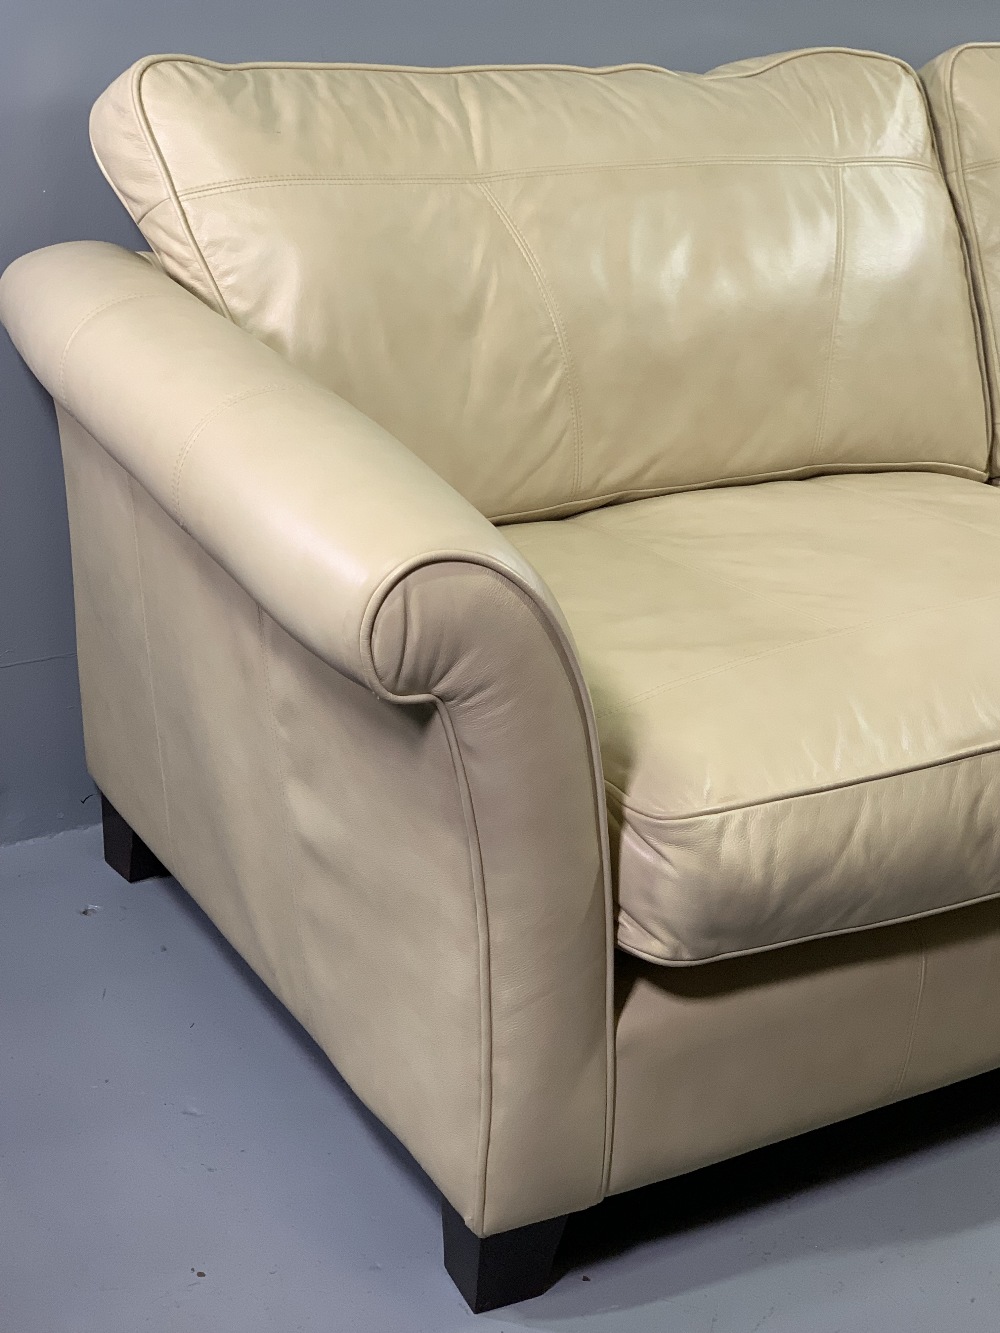 MODERN CREAM LEATHER SETTEE having large double cushions, 85cms H, 226cms W, 93cms D - Image 2 of 5